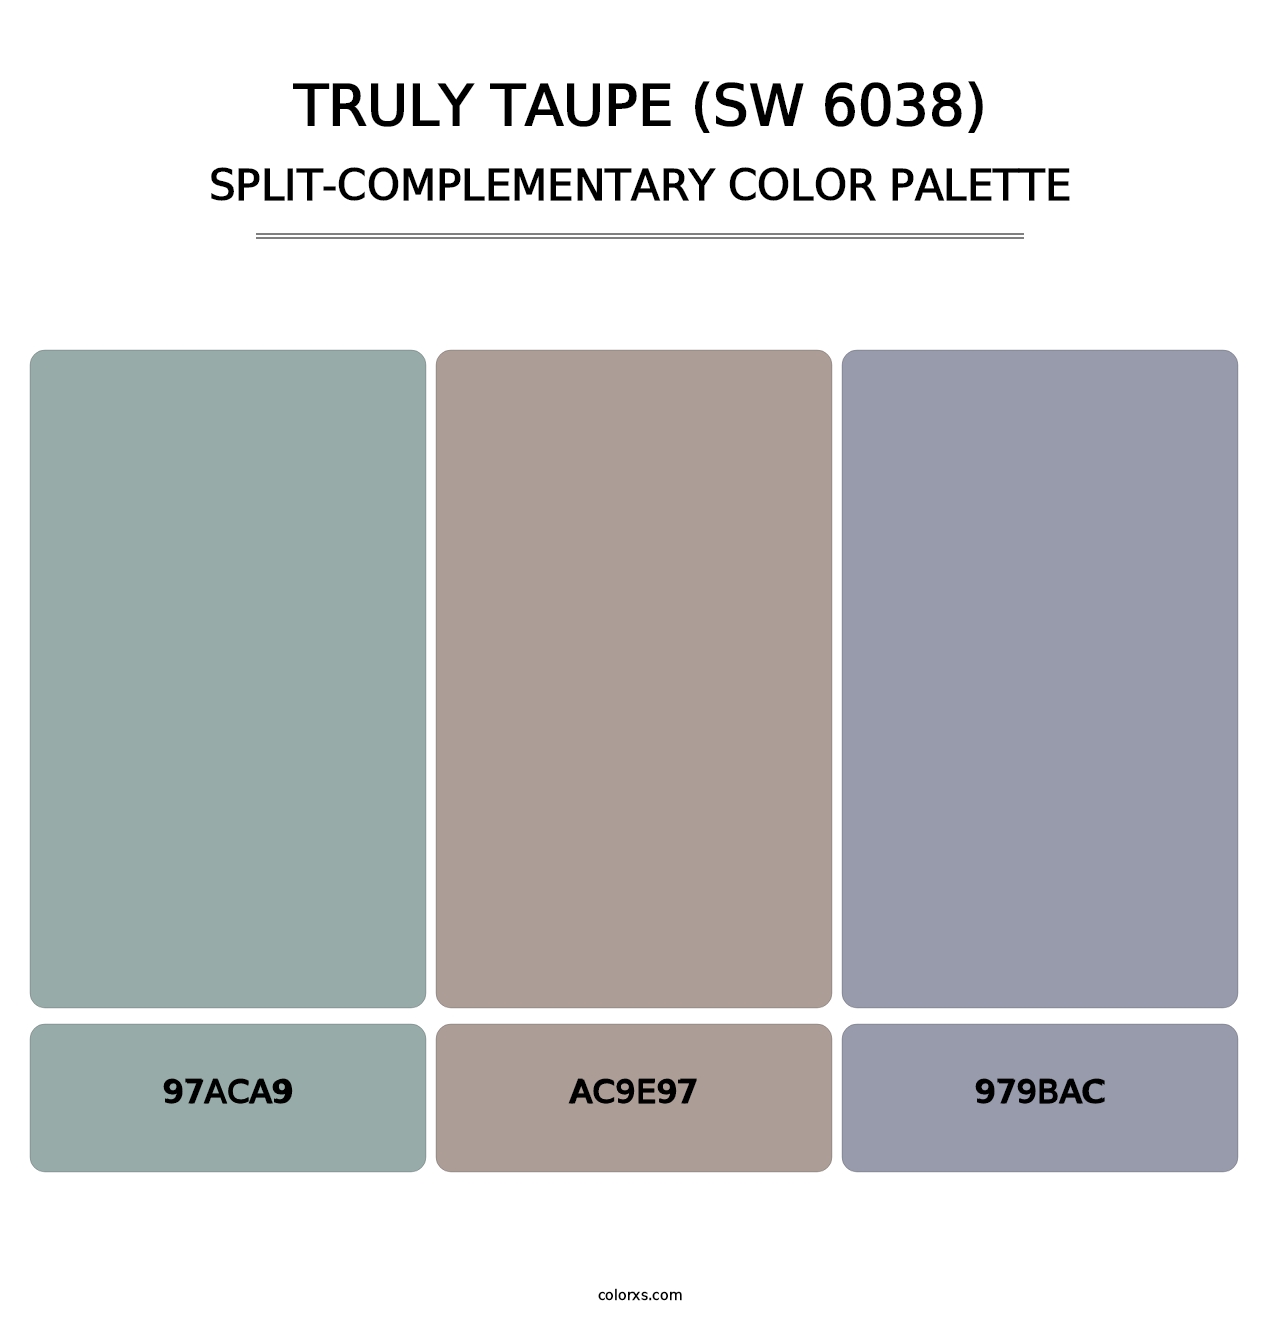 Truly Taupe (SW 6038) - Split-Complementary Color Palette